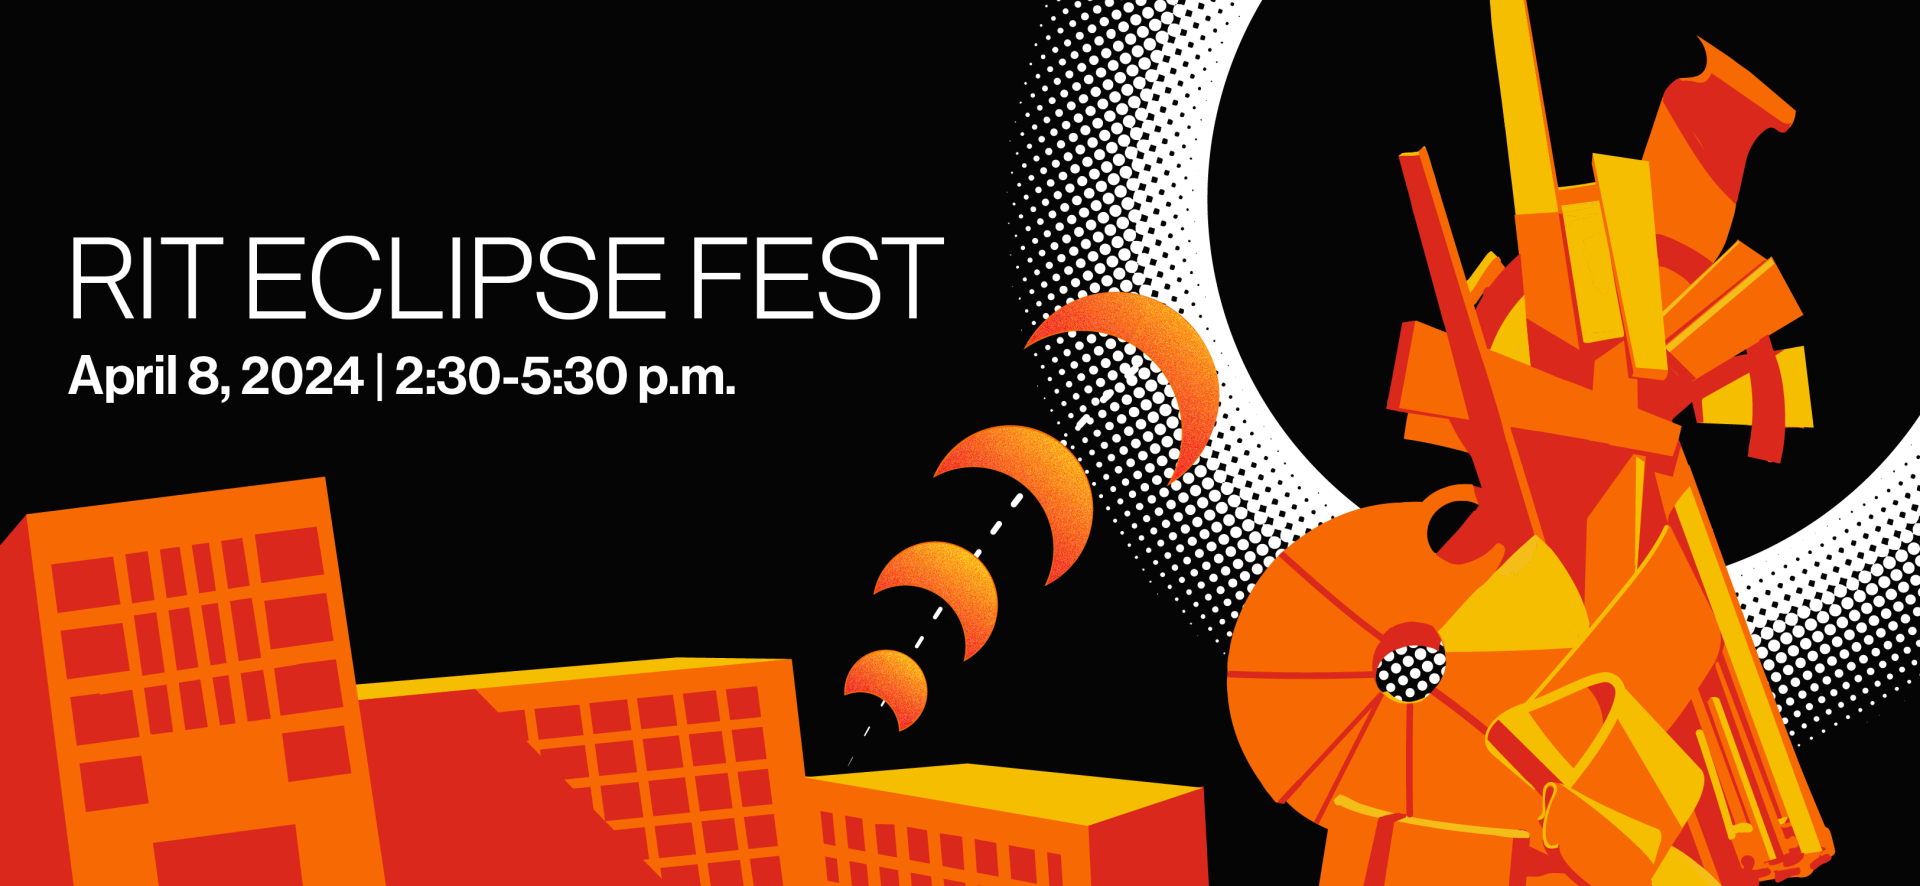 RIT Eclipse Fest, April 8, 2024, 2:30-5:30 p.m. next to an illustration of RIT under and eclipse